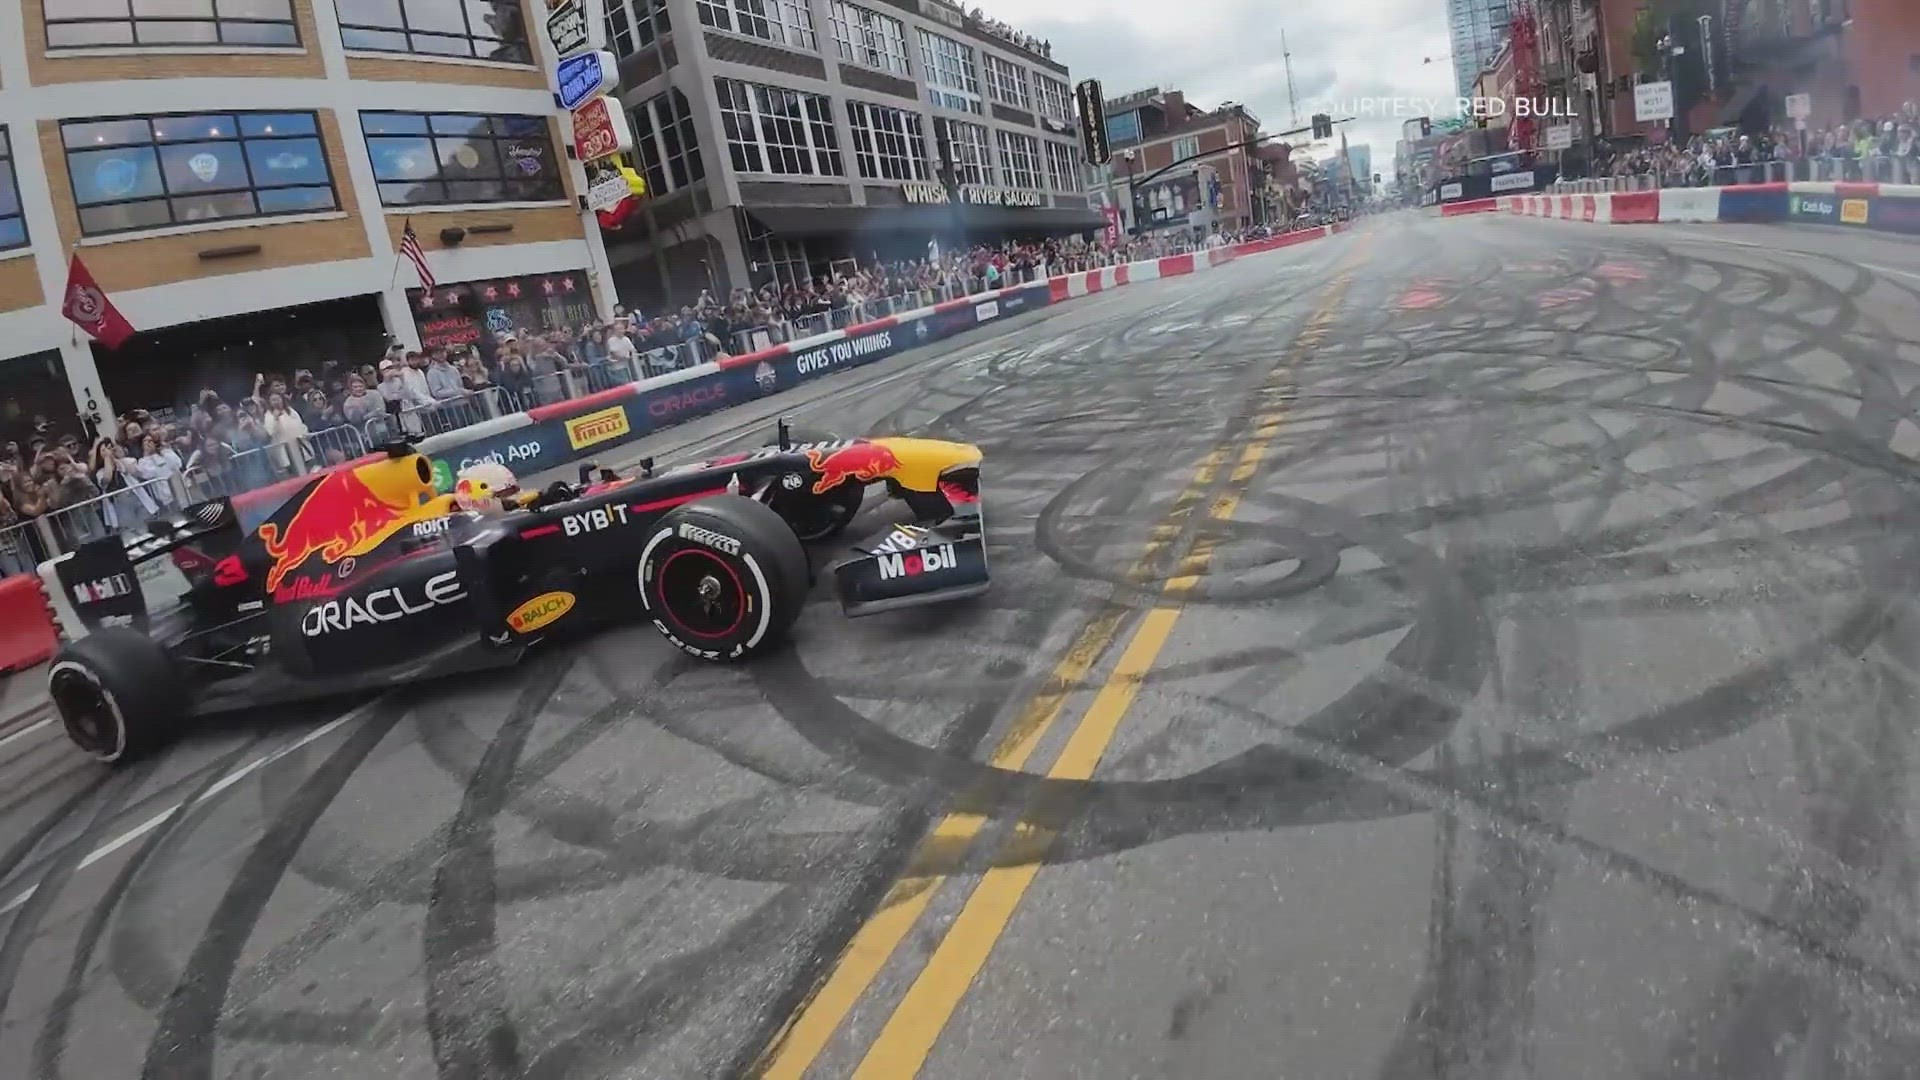 A Formula One Car Event comes right *here to D-C. It's Red bull racing's first-ever show run event in the District.